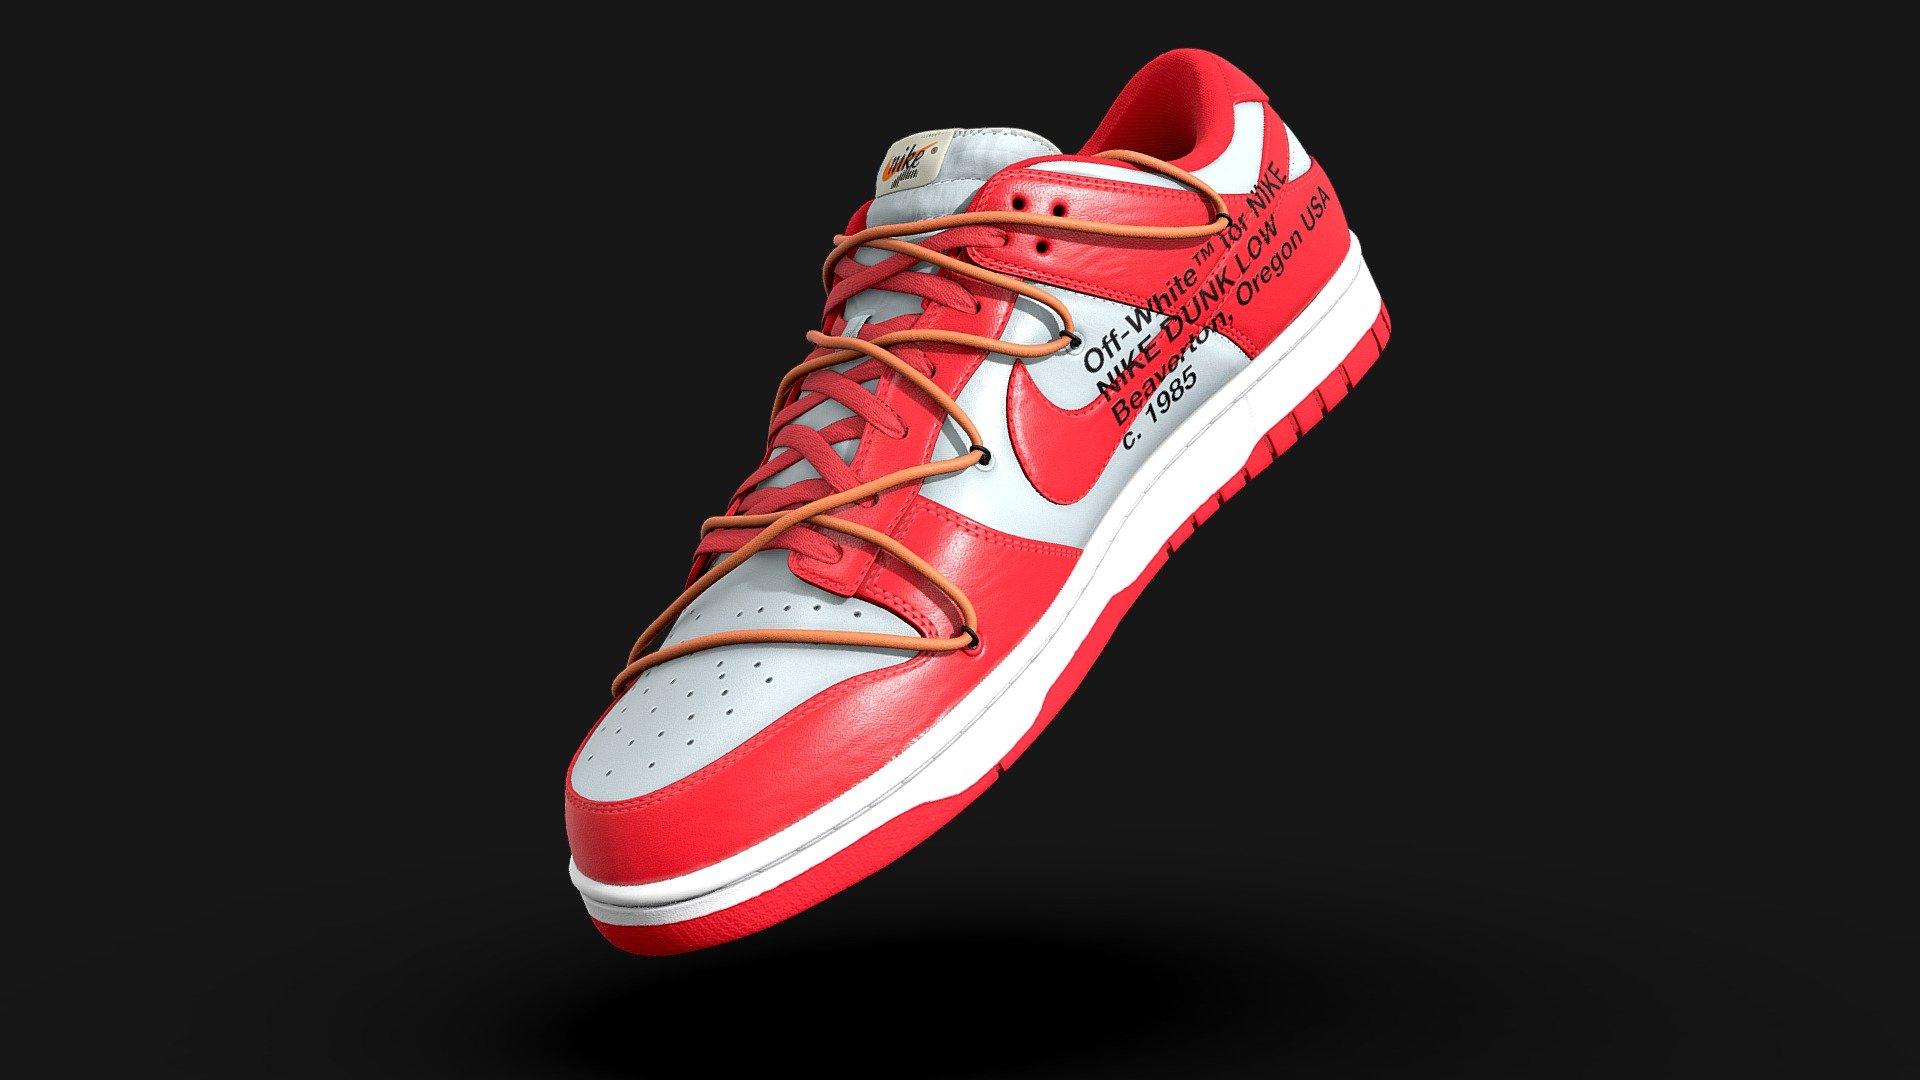 Off White collaboration with Nike on a Dunk low in University Red, made in Blender, textured in Substance. Virgil Ablohs take on the Nike Dunk first debuted in 2019, A reimagined tongue coupled with bright, Flywire lacing helped this shoe to stand out and cement its place in the storied legacy of the Nike Dunk. This colourway boasts red leather accented by a smooth grey leather. 

Every detail was made in the recreation of this shoe, from the text on the medial side of the shoe to the subtlety of each material, nothing went overlooked. The model itself is subdivision ready and consists of four texture sets. The model on display is at Subdivision level 1 and each texture is at 4096x4096 resolution

Download File Contents:
1. Native Blender file with linked textures
2. Folder containing all textures in 4096x4096 png format. 
3. FBX and OBJ versions of the shoes - Off White x Nike Dunk University Red Shoe - Buy Royalty Free 3D model by Joe-Wall (@joewall) 3d model